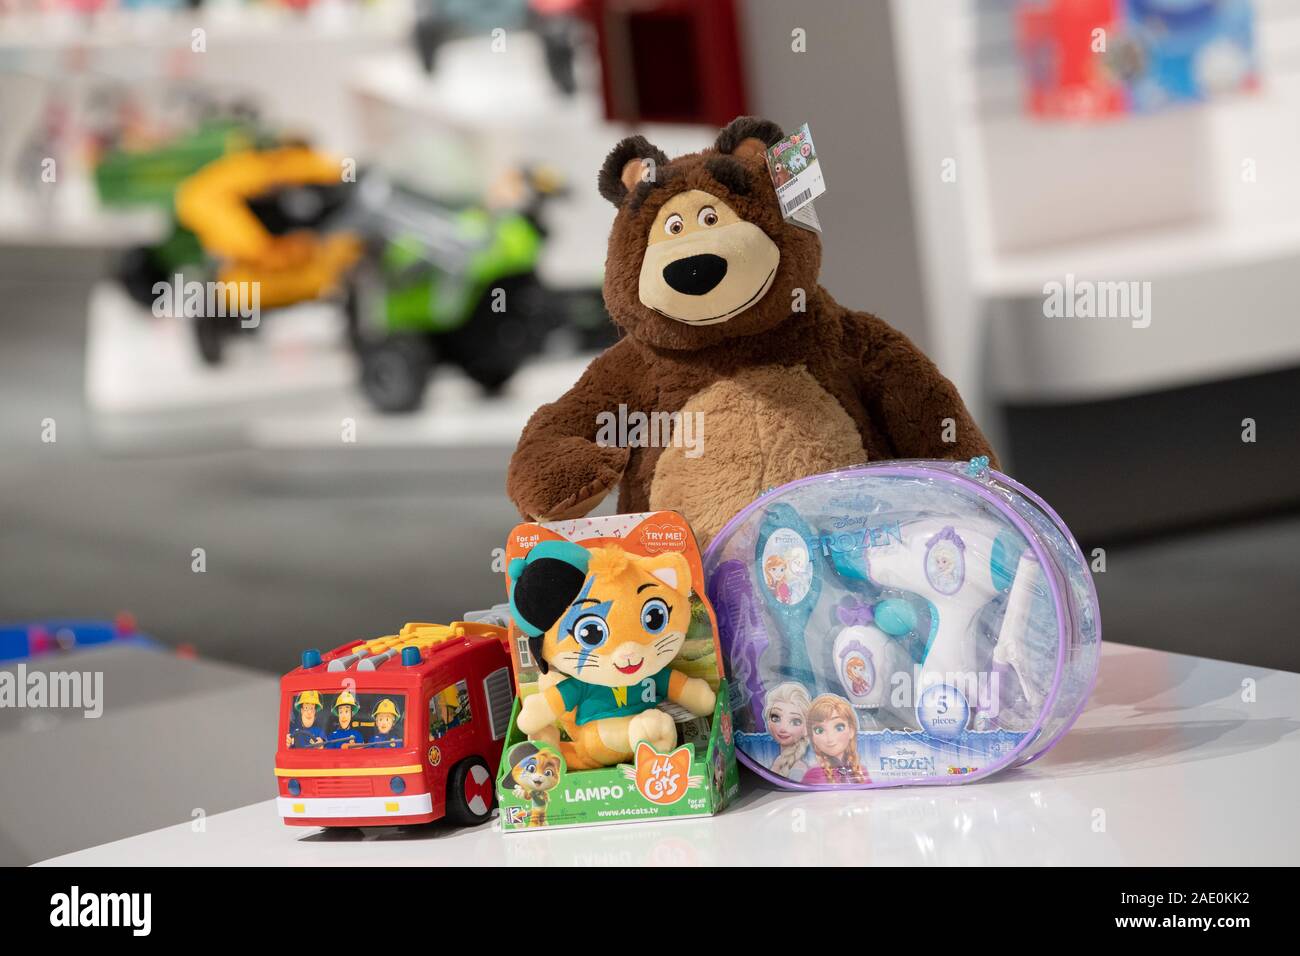 27 November 2019, Bavaria, Fürth: The toys and licensed products 'Fireman Sam' (l-r) by Dickie Toys, '44 Cats' by Smoby, the bear from 'Mascha und der Bär' by Dickie Toys and a toy beauty set with the counterfeits of the characters from the Disney film 'The Ice Queen 2' (original title 'Frozen') stand side by side at the toy manufacturer Simba Dickie Group. According to the German Toy Industry Association (DVSI), licensed products accounted for around 20 percent of the total turnover of the toy industry in 2018. (to dpa-Korr: 'The ice queen conquers the children's rooms') Photo: Daniel Karmann Stock Photo